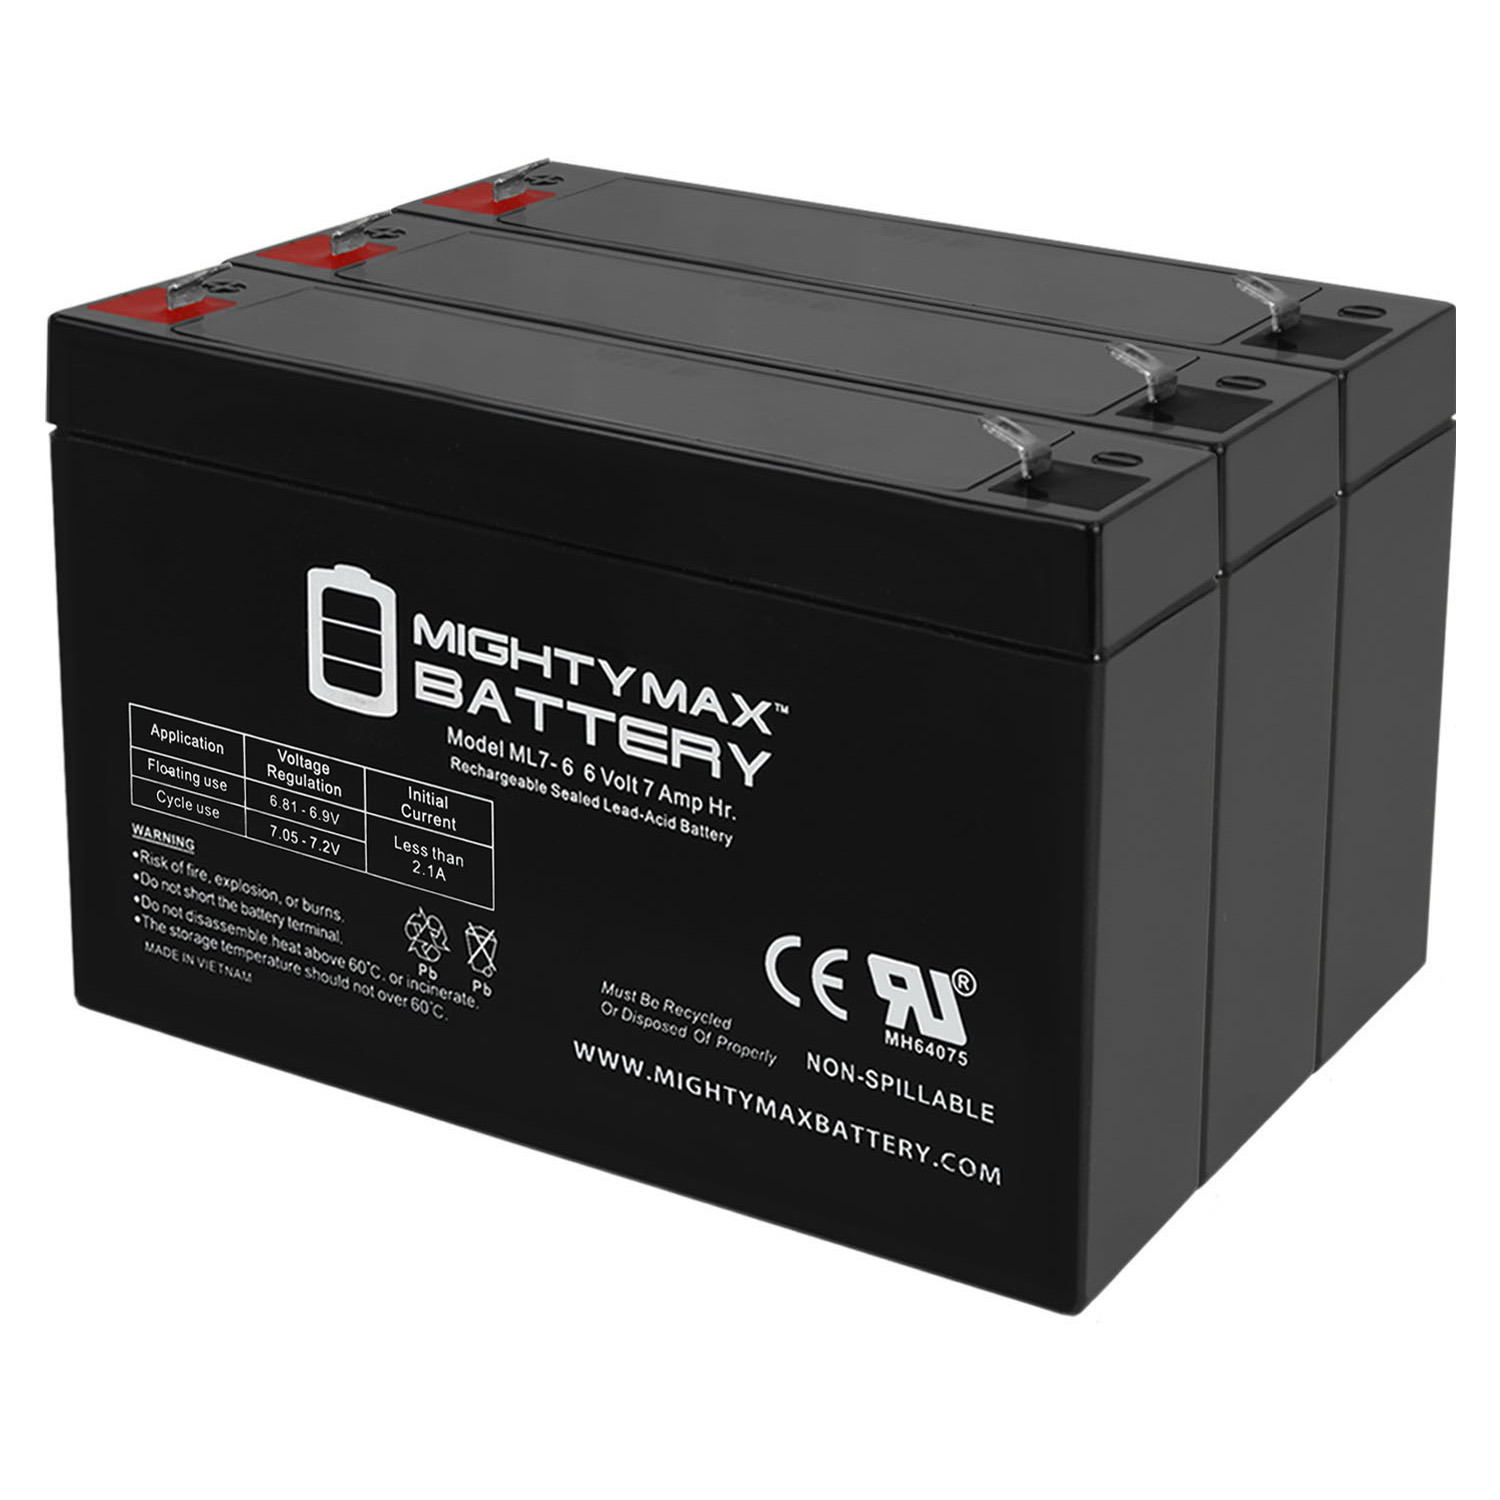 6V 7Ah SLA Replacement Battery for Long Way LW-3FM7.6J - 3 Pack